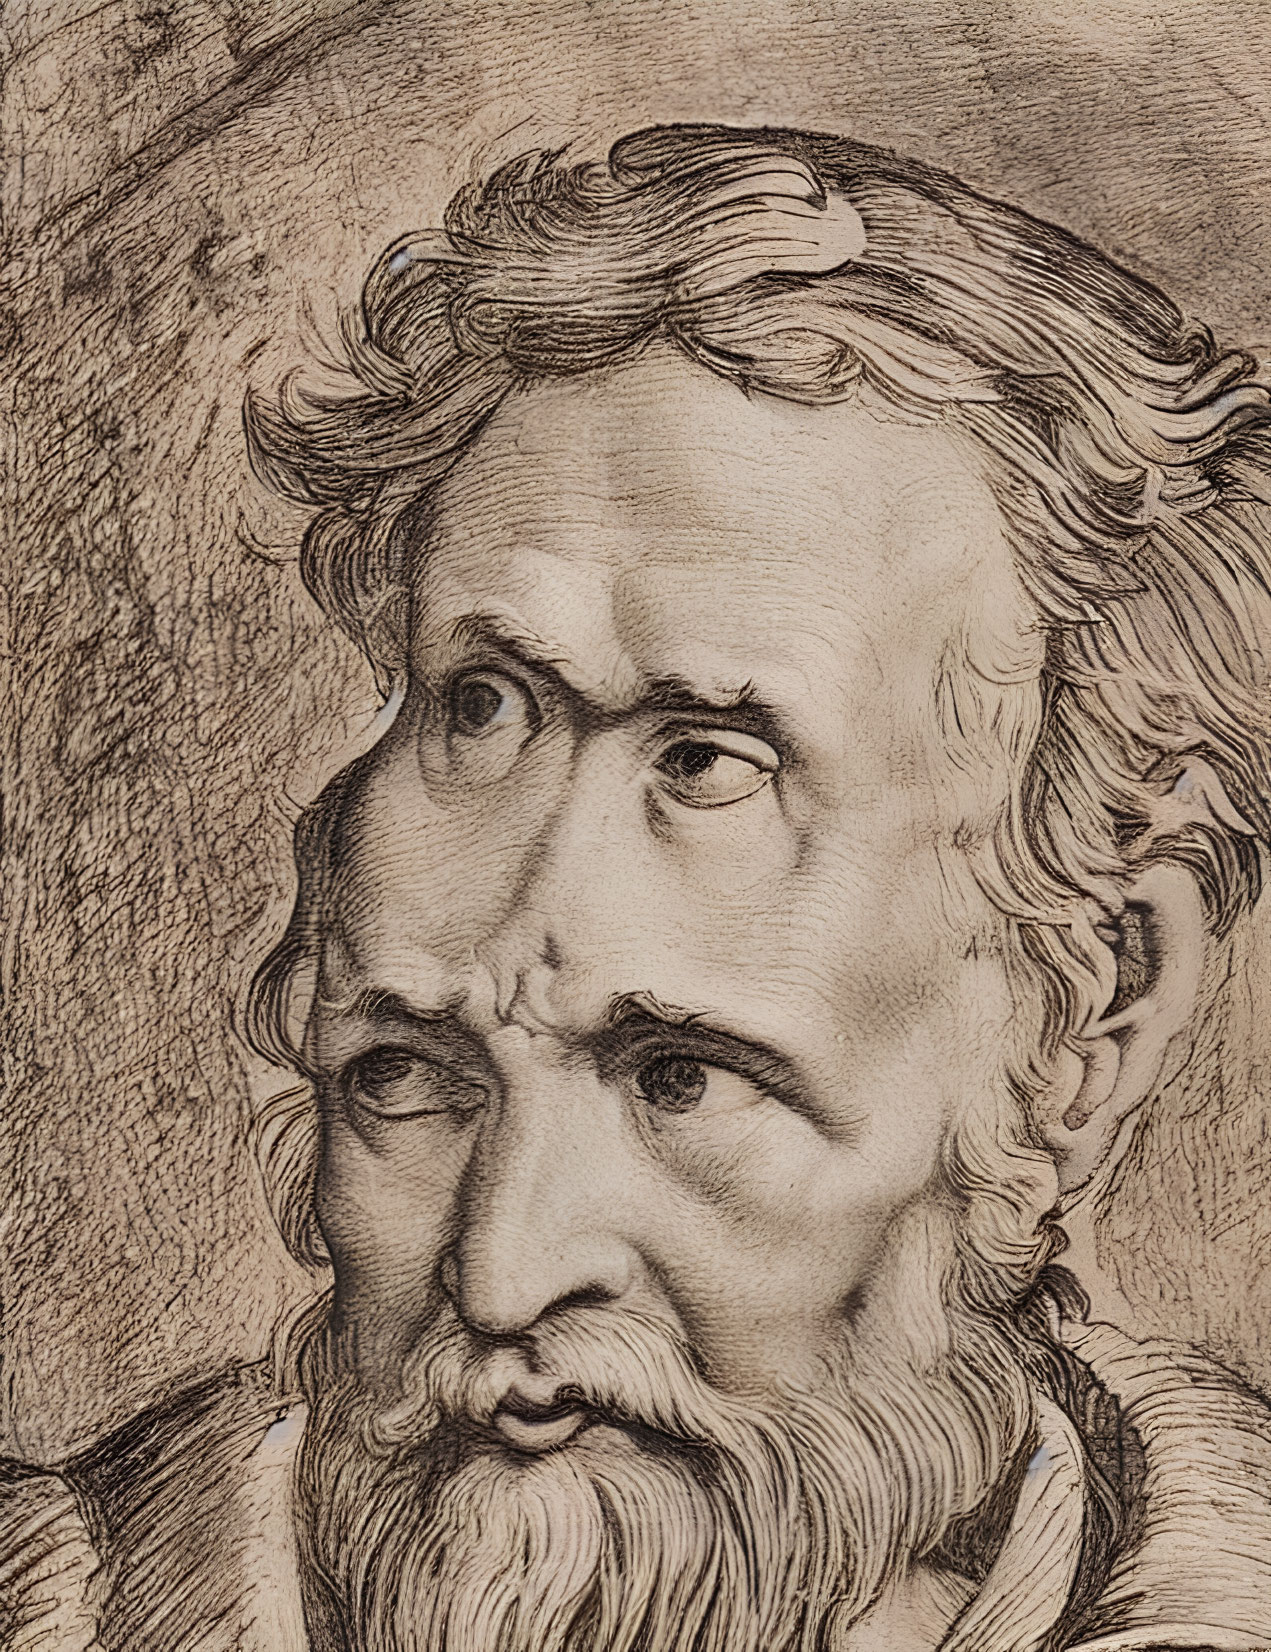 Detailed Sketch of Older Man with Beard and Intense Gaze